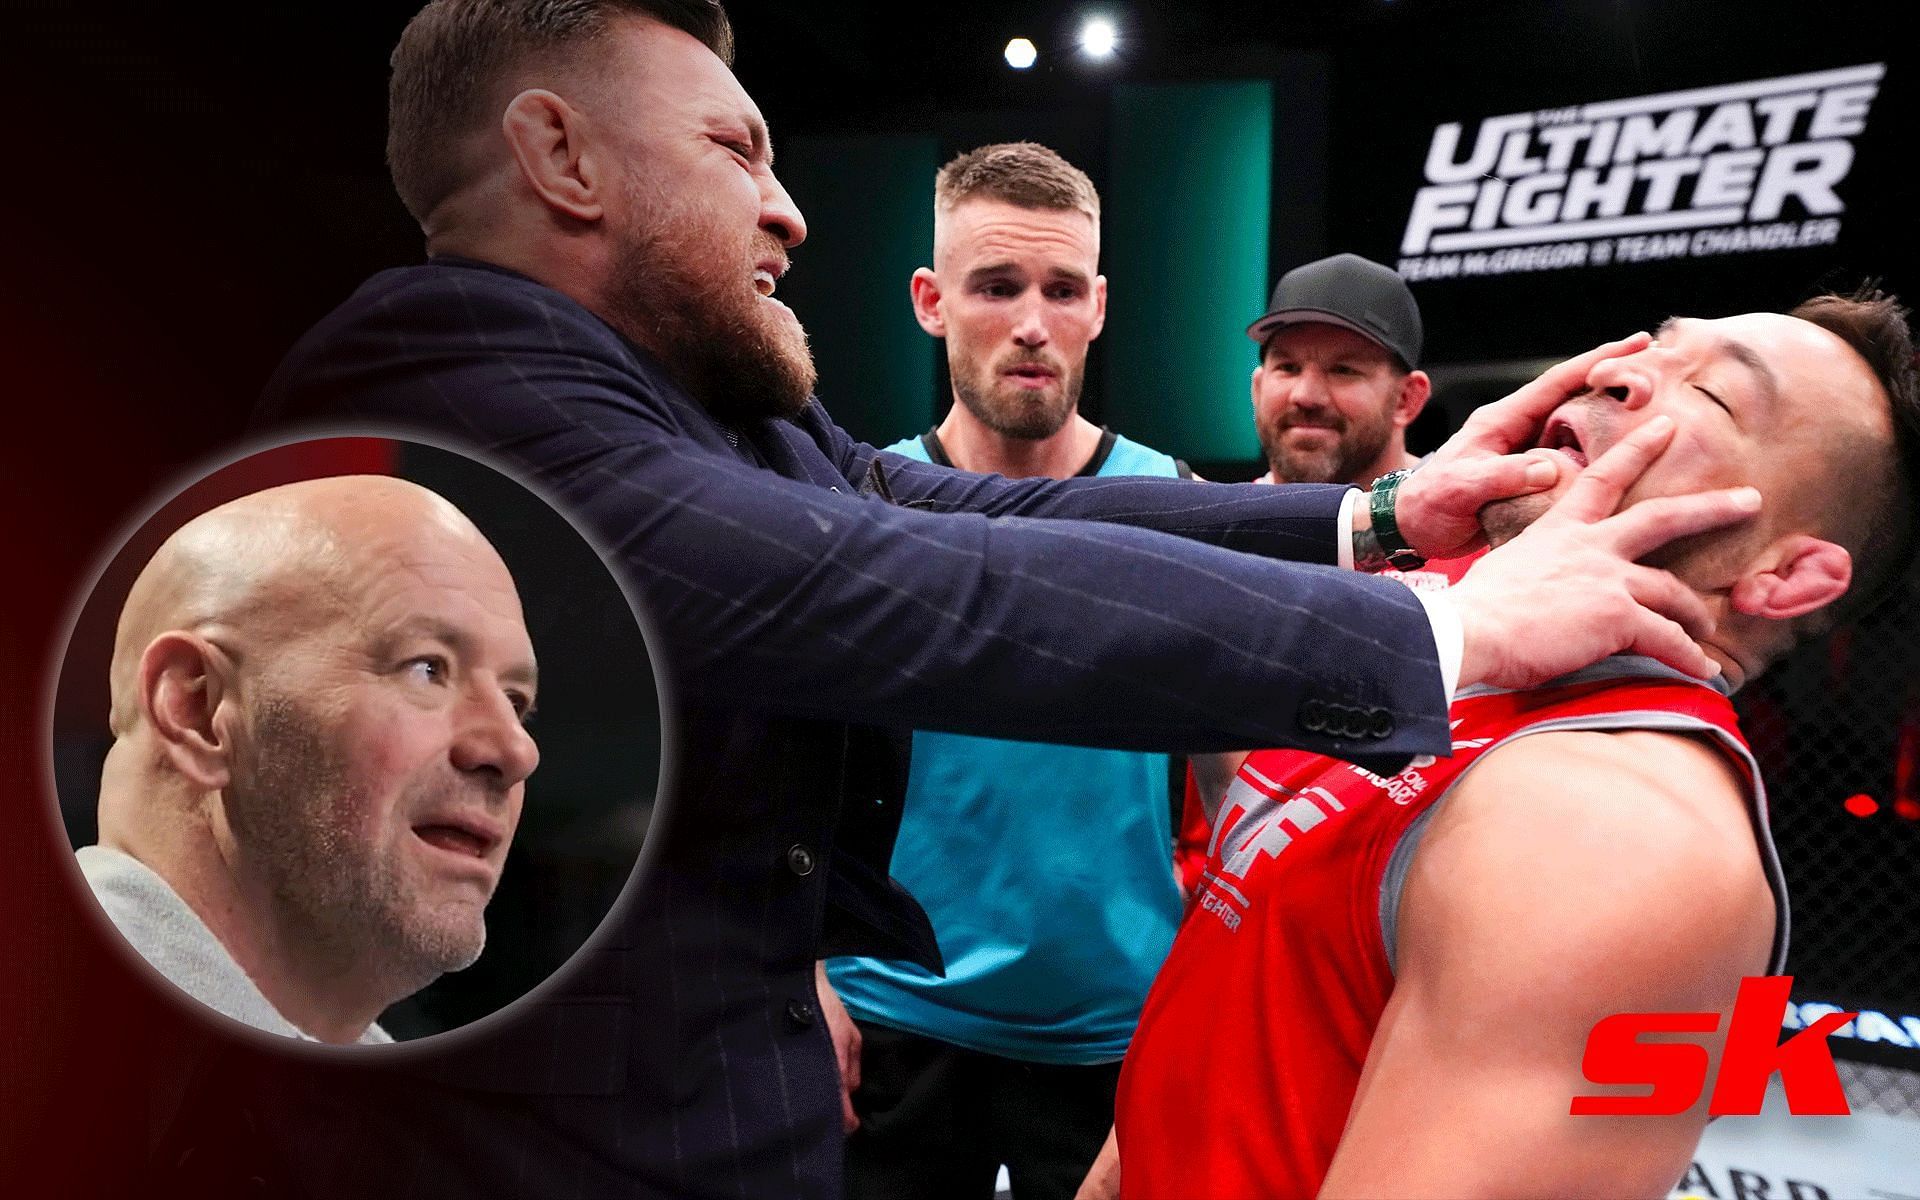 Conor McGregor vs. Michael Chandler [Images via: @MMAFighting and @UltimateFighter on Twitter]